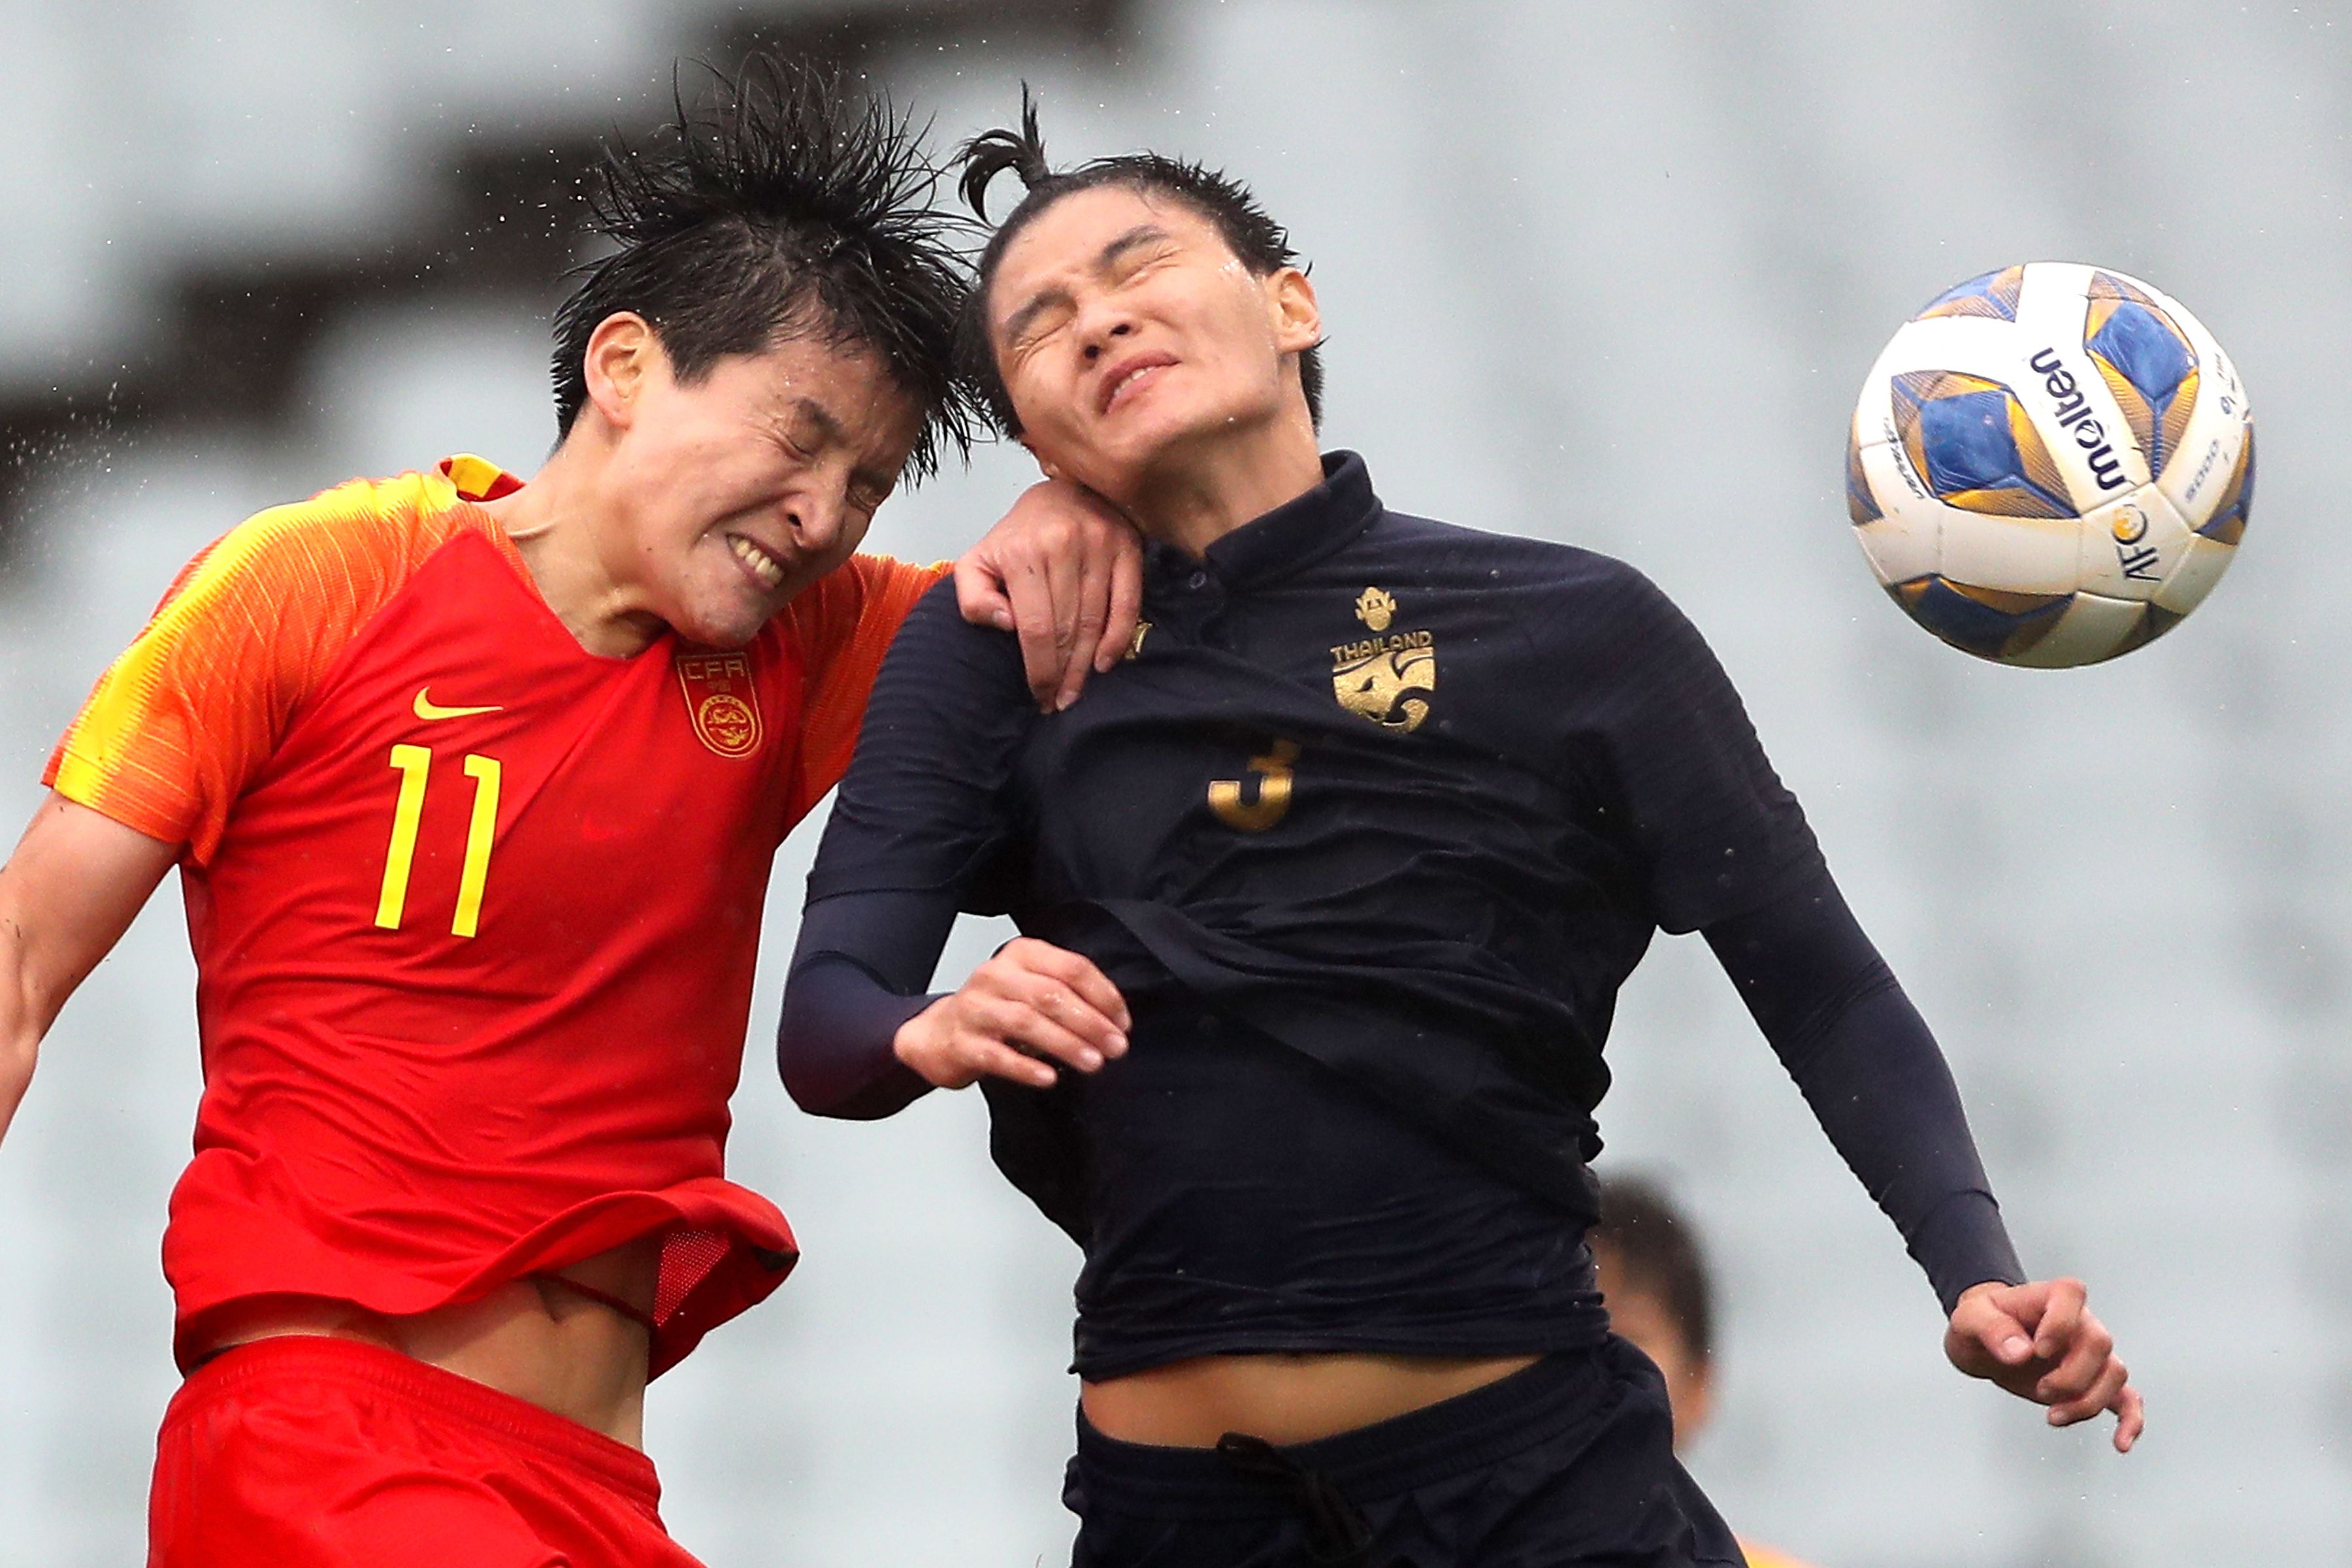 (FILES) This file photo taken on February 7, 2020 shows China's Wang Shanshan (L) and Thailand's Natthakarn Chinwong competing for the ball during the women's Olympic football tournament qualifier match between China and Thailand at Campbelltown Stadium in Sydney on February 7, 2020. - The coronavirus has destroyed the Tokyo Olympic dreams of some Chinese athletes and disrupted the preparations of others, forcing them to miss tournaments and train in strict isolation -- sometimes in masks. (Photo by JEREMY NG / AFP) / RO GO WITH: China health virus Oly 2020 CHN, FOCUS by Peter STEBBINGS      nn -- IMAGE RESTRICTED TO EDITORIAL USE - STRICTLY NO COMMERCIAL USE --